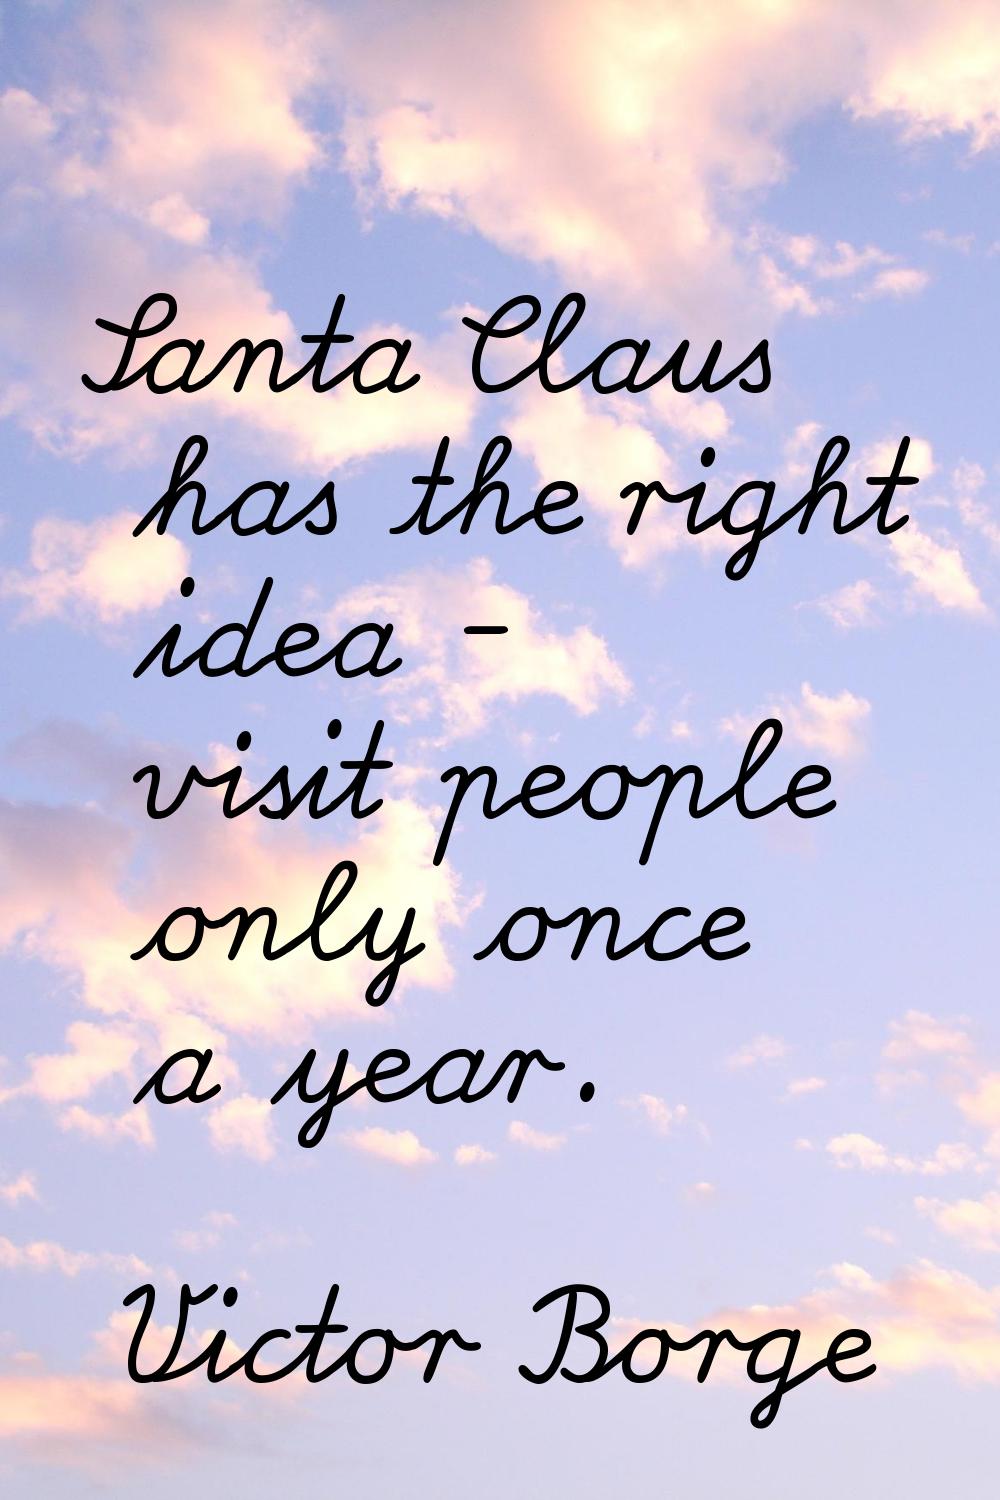 Santa Claus has the right idea - visit people only once a year.